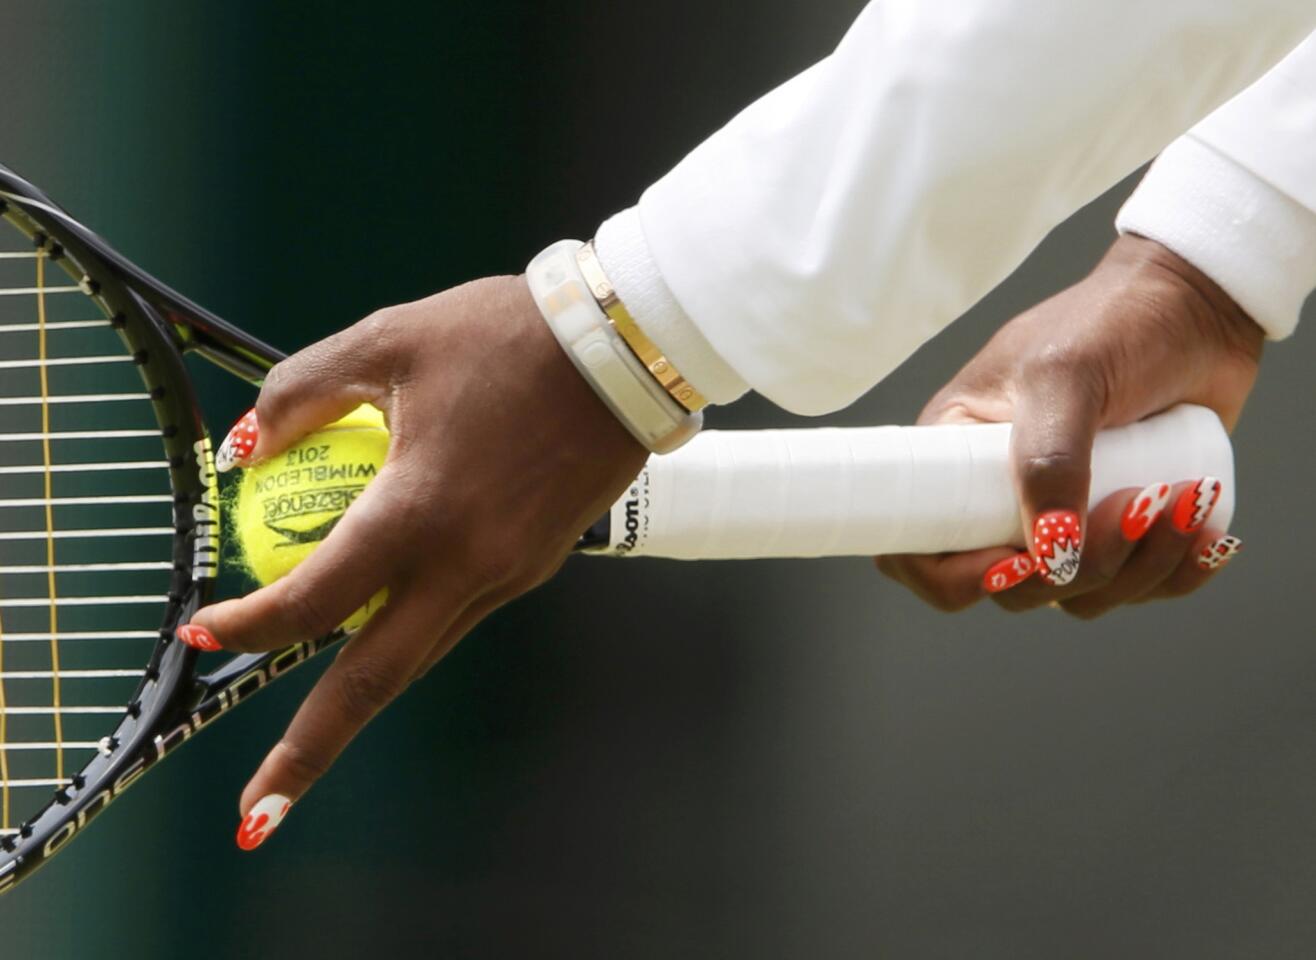 Serena Williams of the U.S. warms up before her women's singles tennis match against Caroline Garcia of France at the Wimbledon Tennis Championships, in London